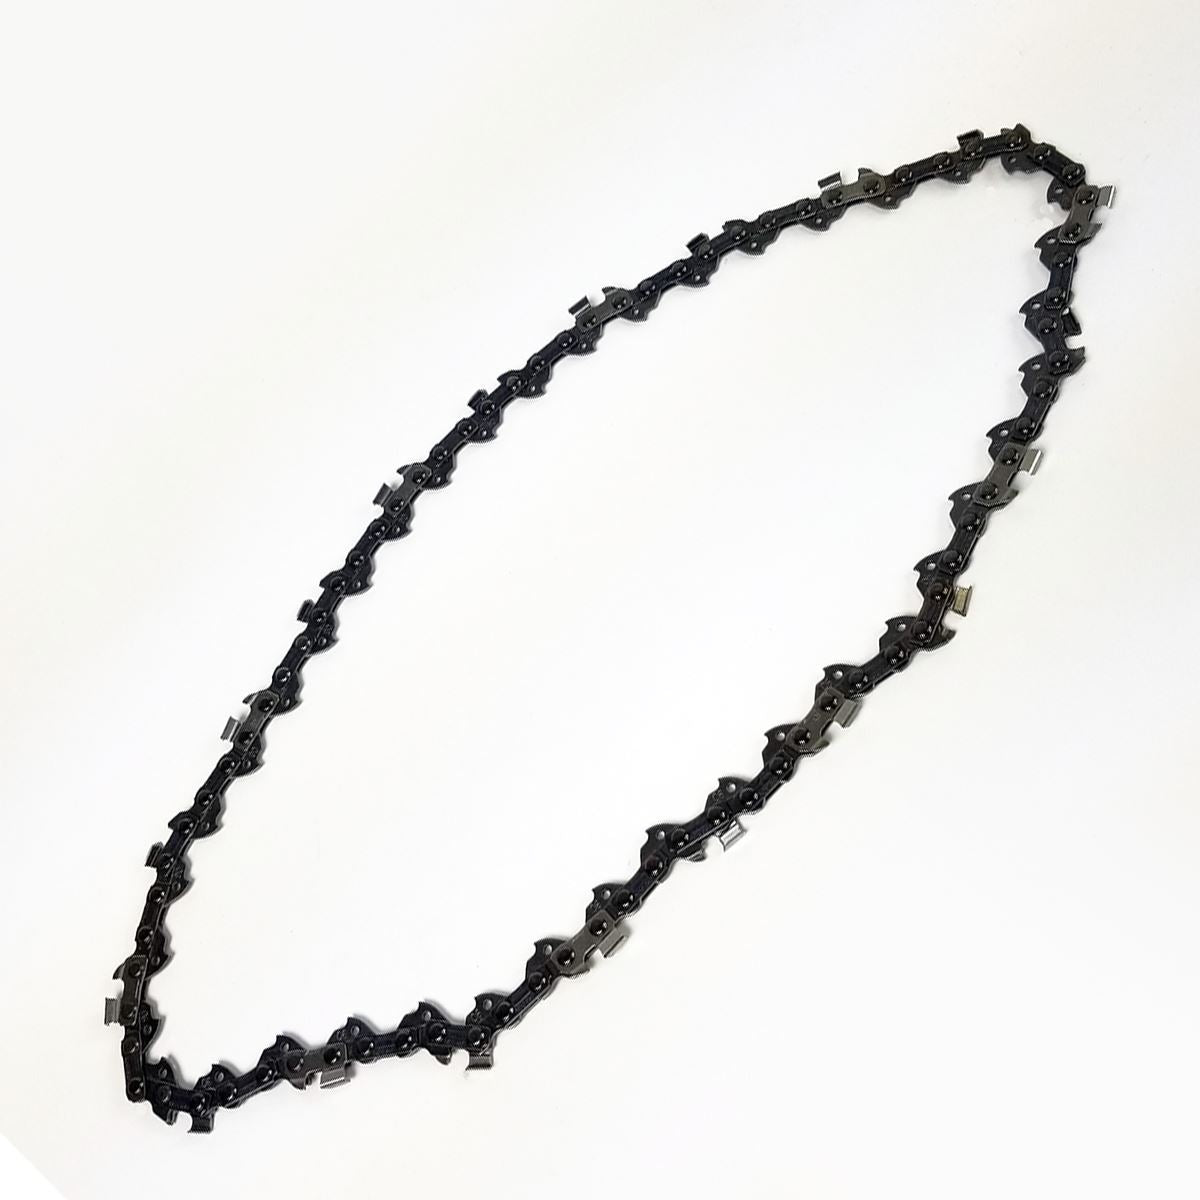 12" Chainsaw Chain for LCS32412